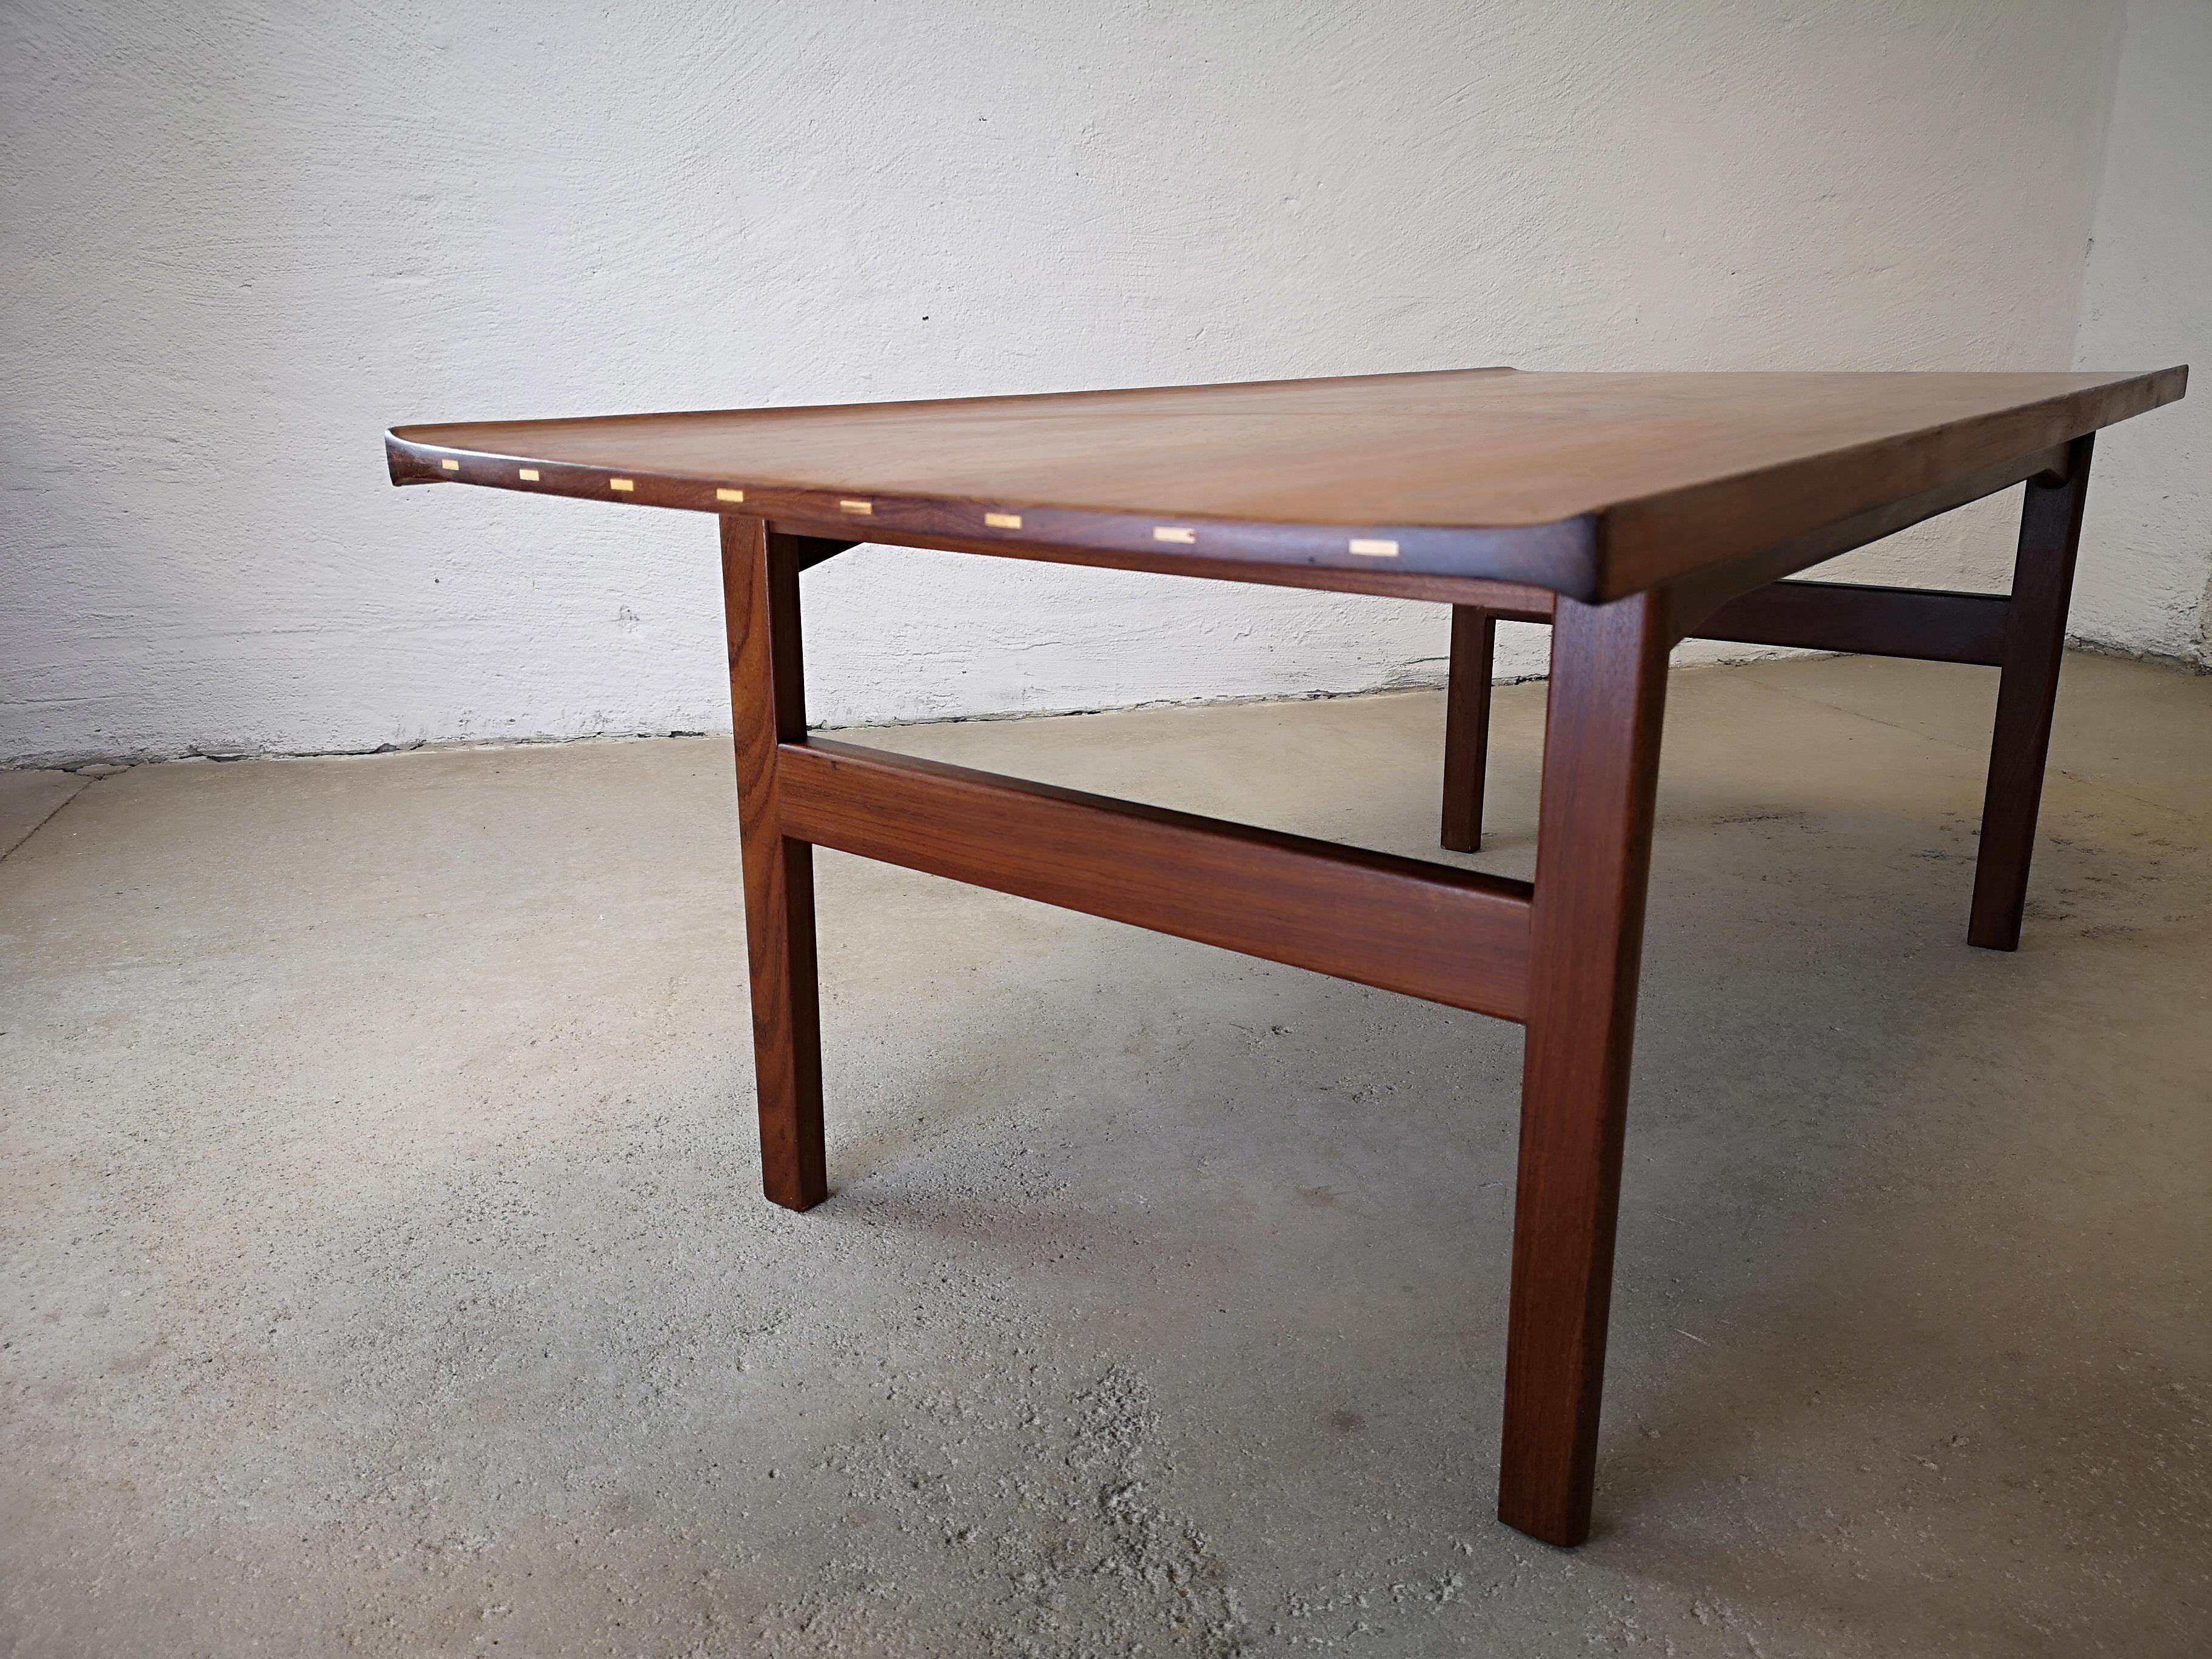 Mid-20th Century Solid Teak Coffee Table by Tove and Edvard Kindt Larsen